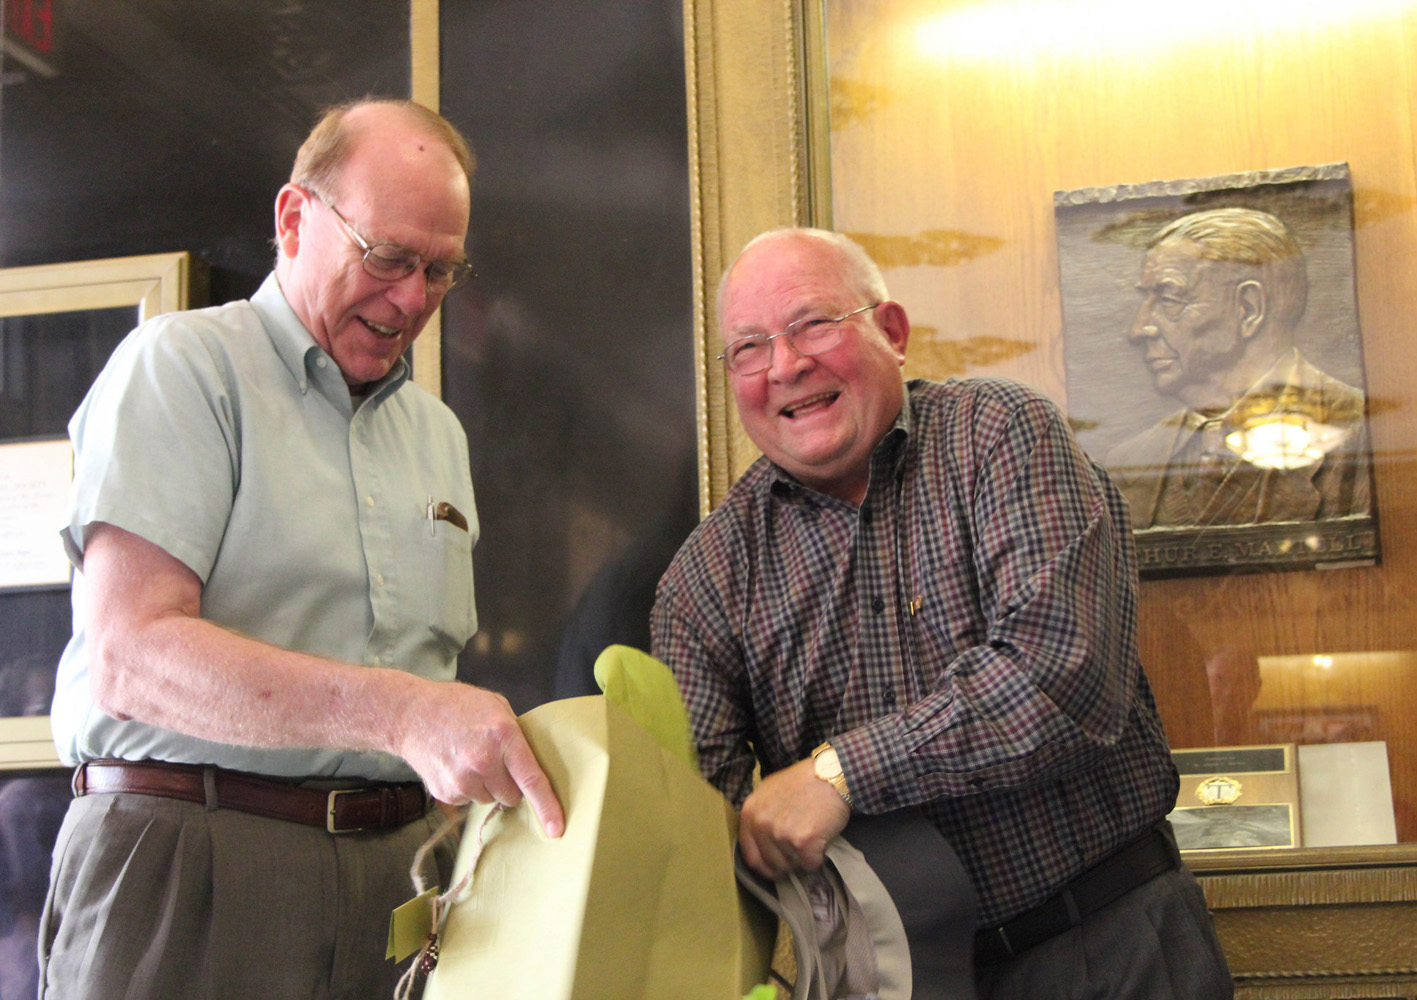 Texas A&amp;M chemist Michael Rosynek (left) looks on as fellow Texas A&amp;M chemist John Fackler (right) opens a gift at his 80th birthday celebration in the Texas A&amp;M Chemistry Building.